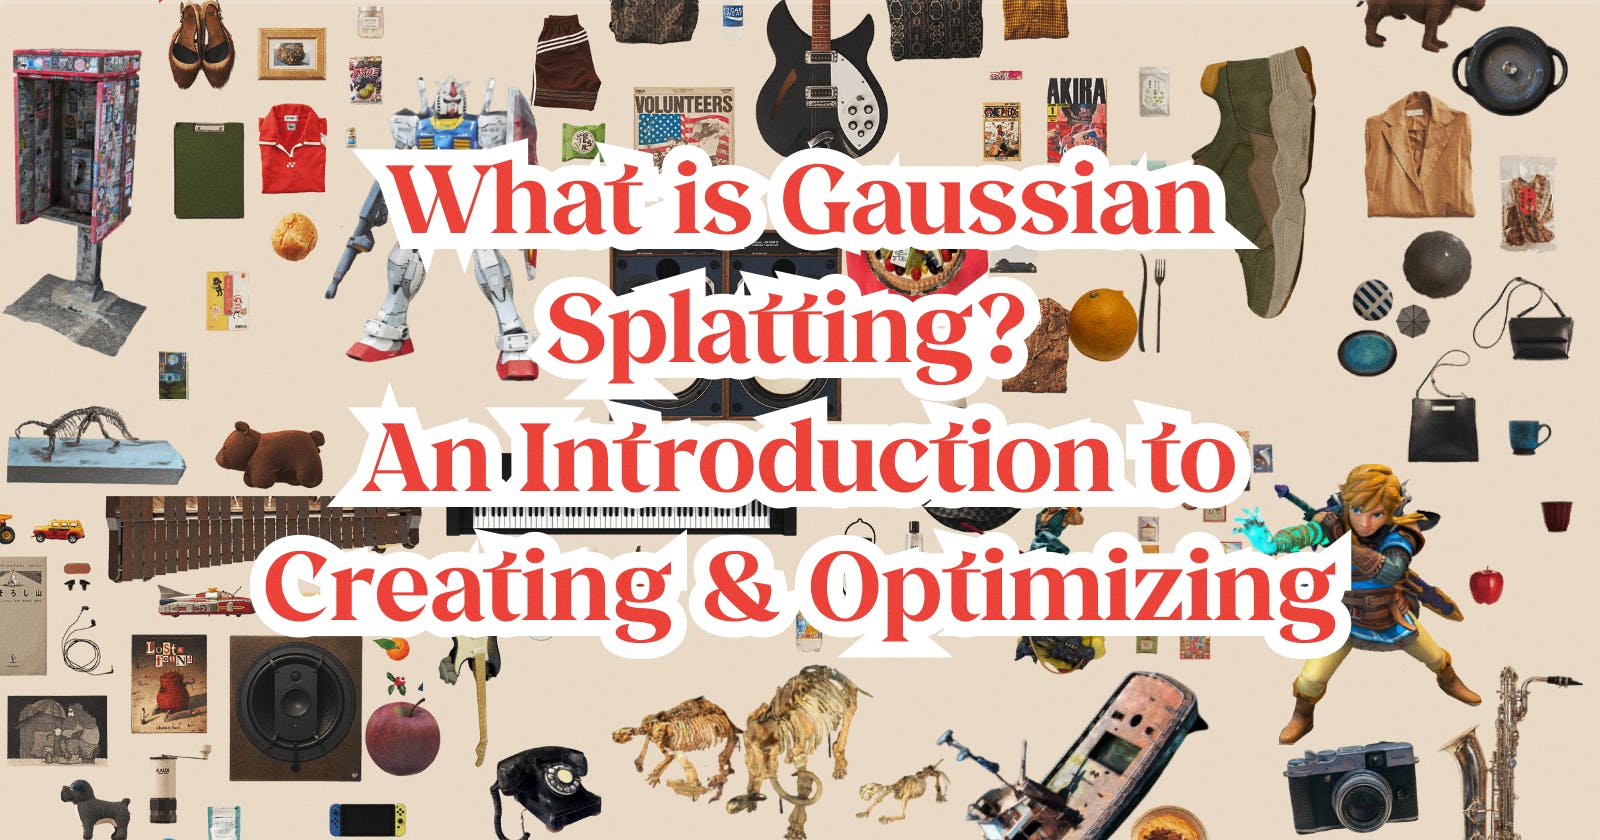 What is Gaussian Splatting? An Introduction to Creating & Optimizing